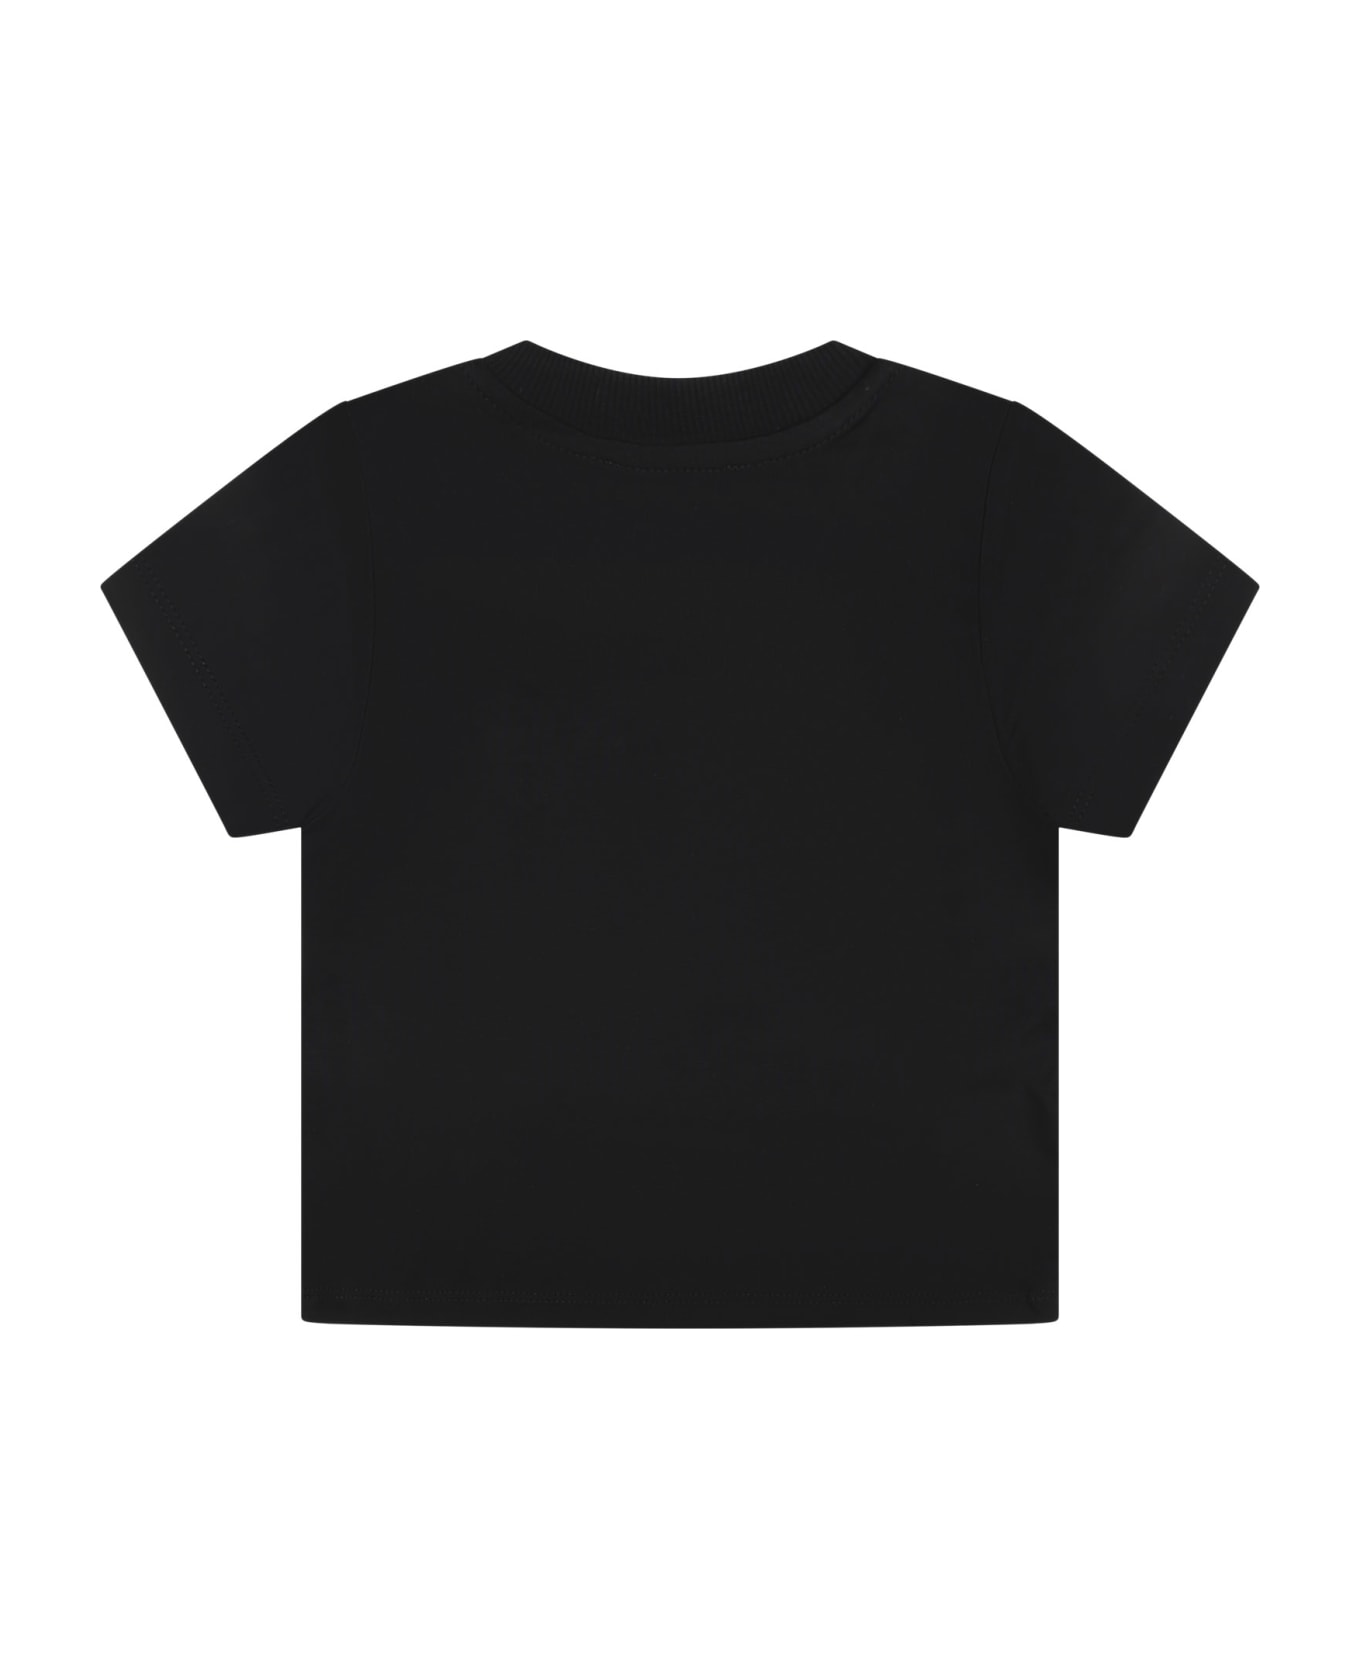 Moschino Black T-shirt For Baby Kids With Teddy Bear - Black